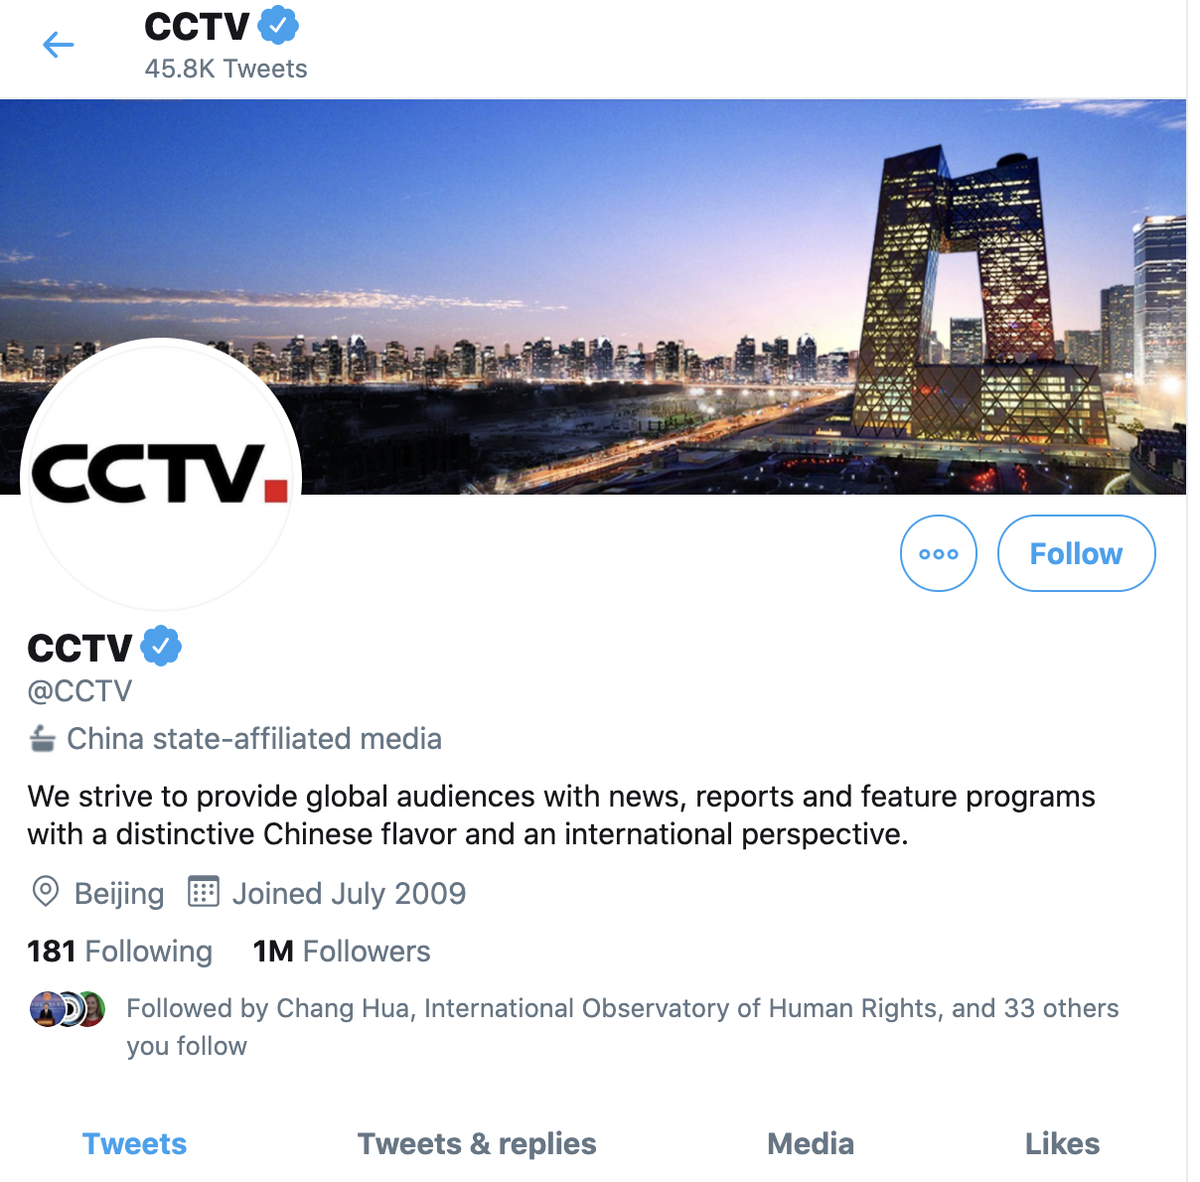 The Chinese foreign ministry and one of its somewhat controversial spokespeople Zhao Lijian have been labelled. And two more well-known Chinese media outlets,  @CCTV and  @CGTNOfficial, have also got "state-affiliated media" labels